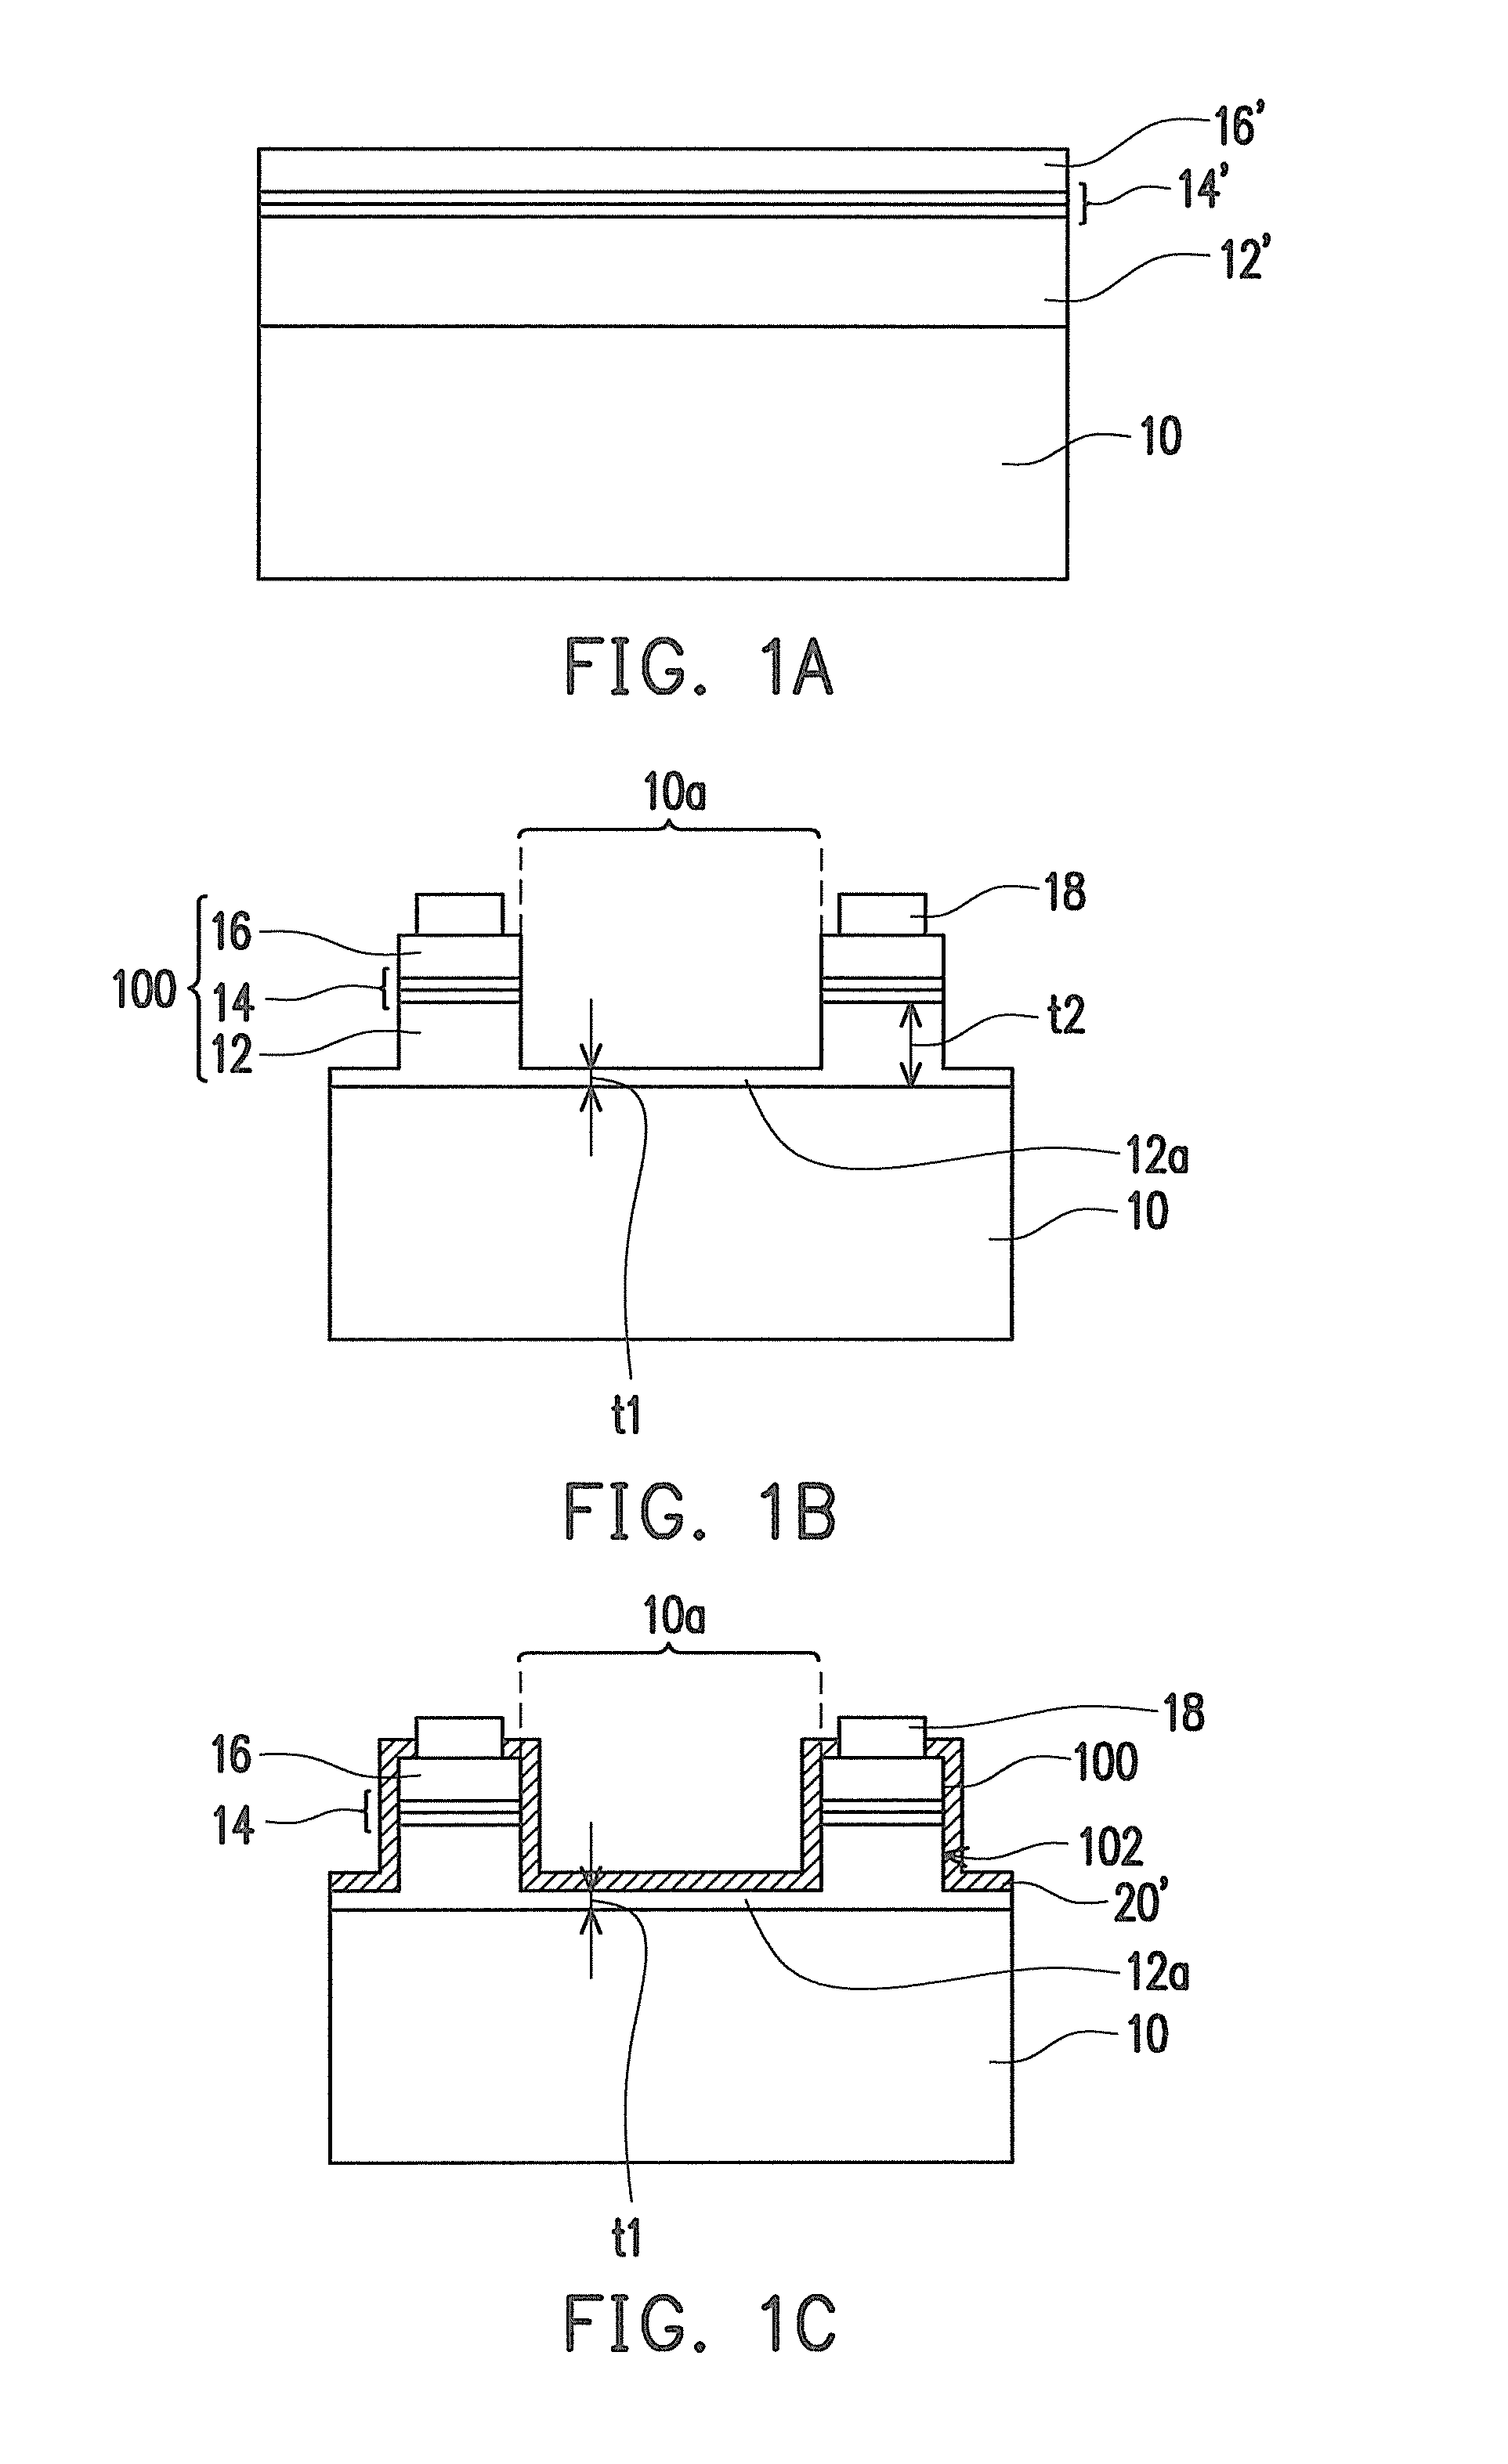 Method of manufacturing a light emitting diode element